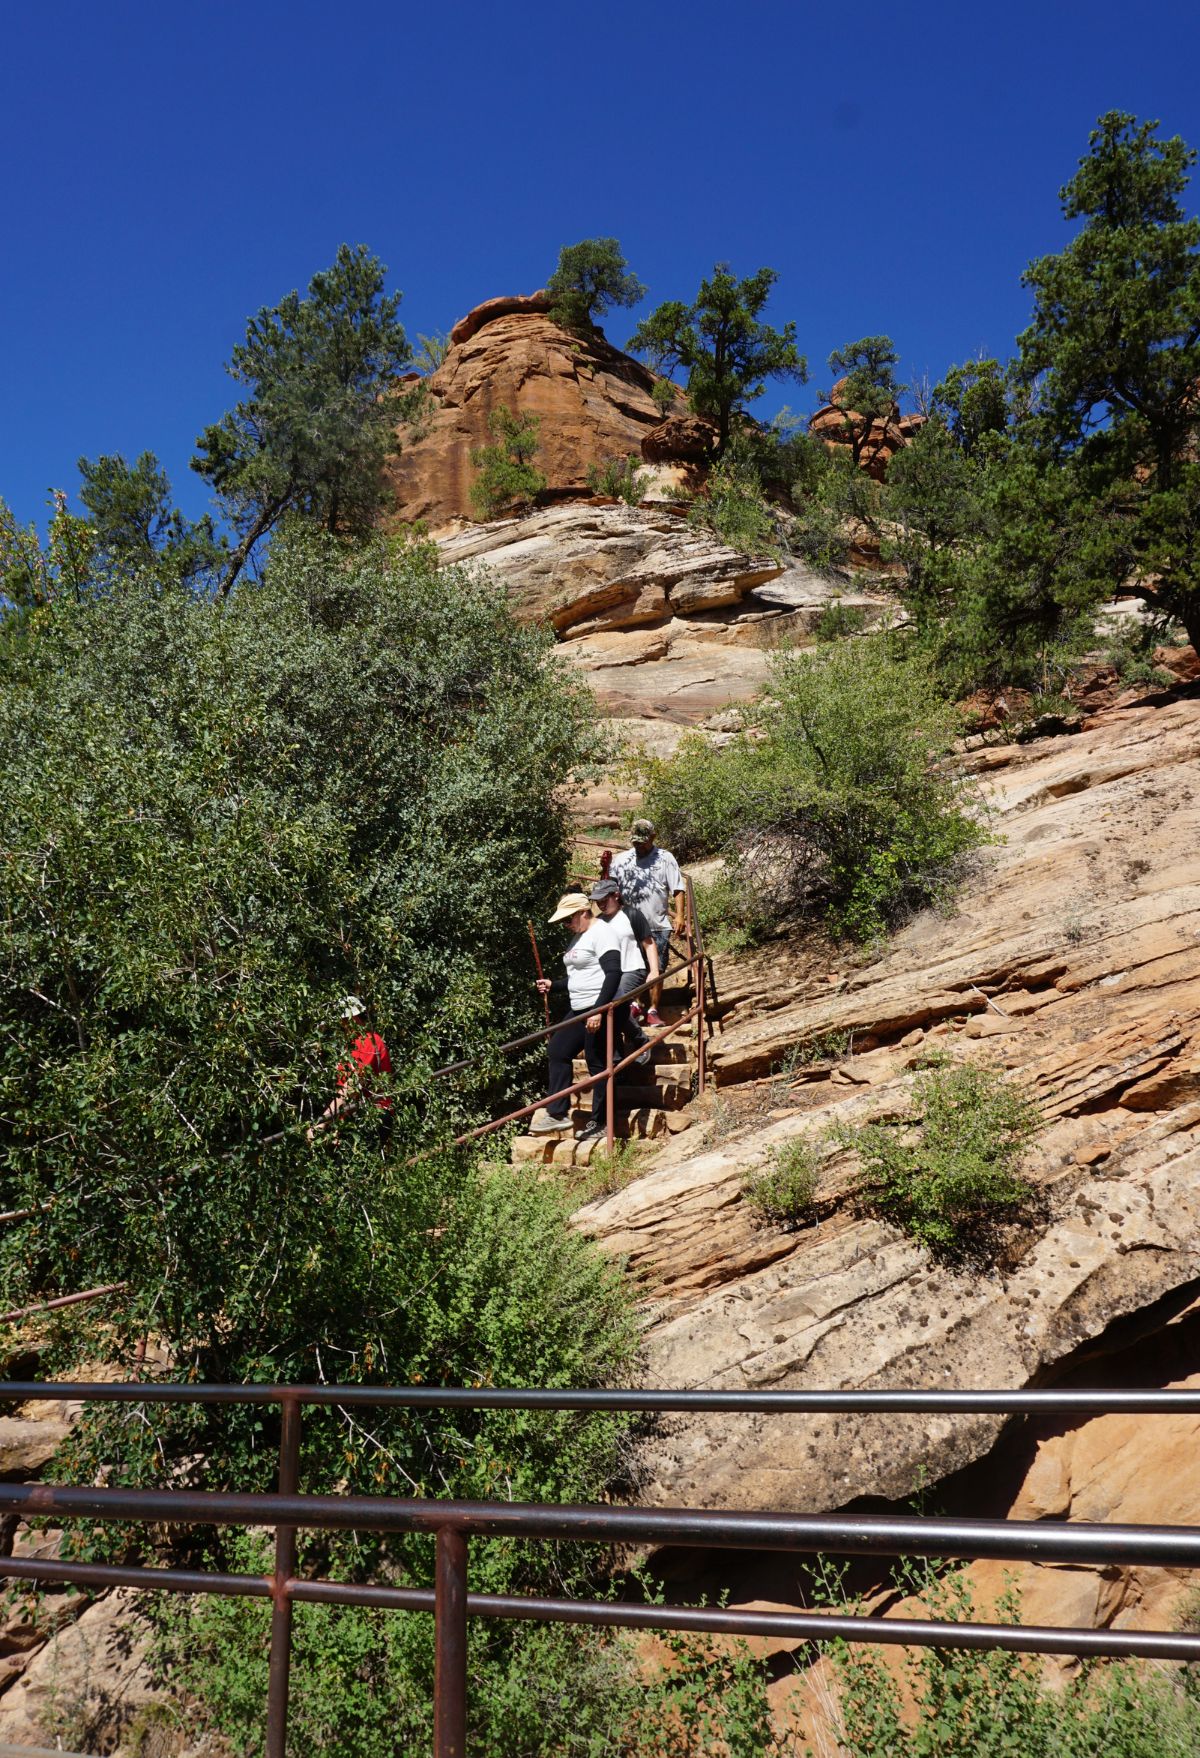 A group of people walking up a rocky path.